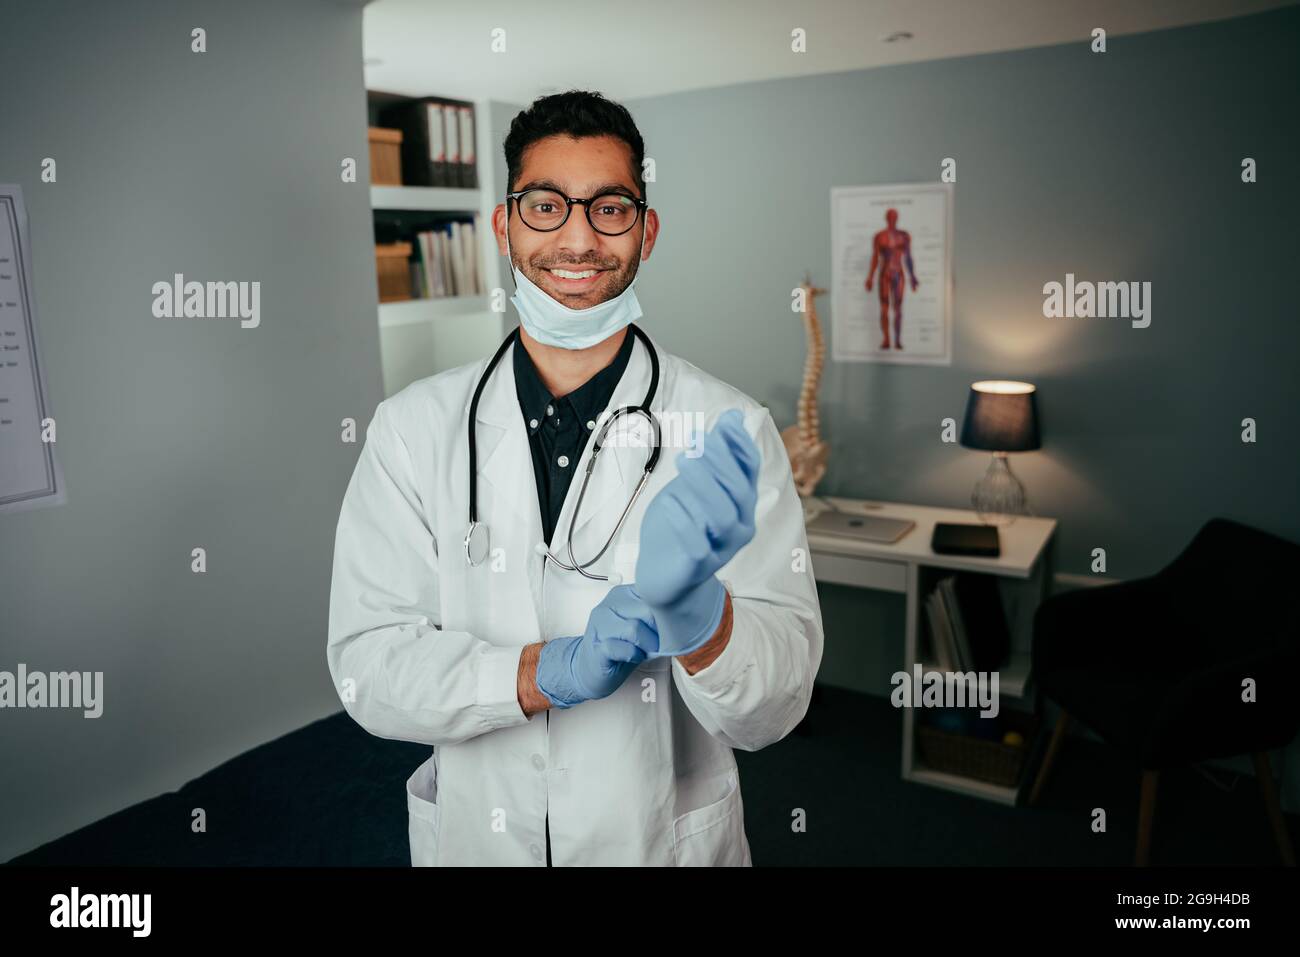 Mixed race professional doctor working in clinic smiling Stock Photo